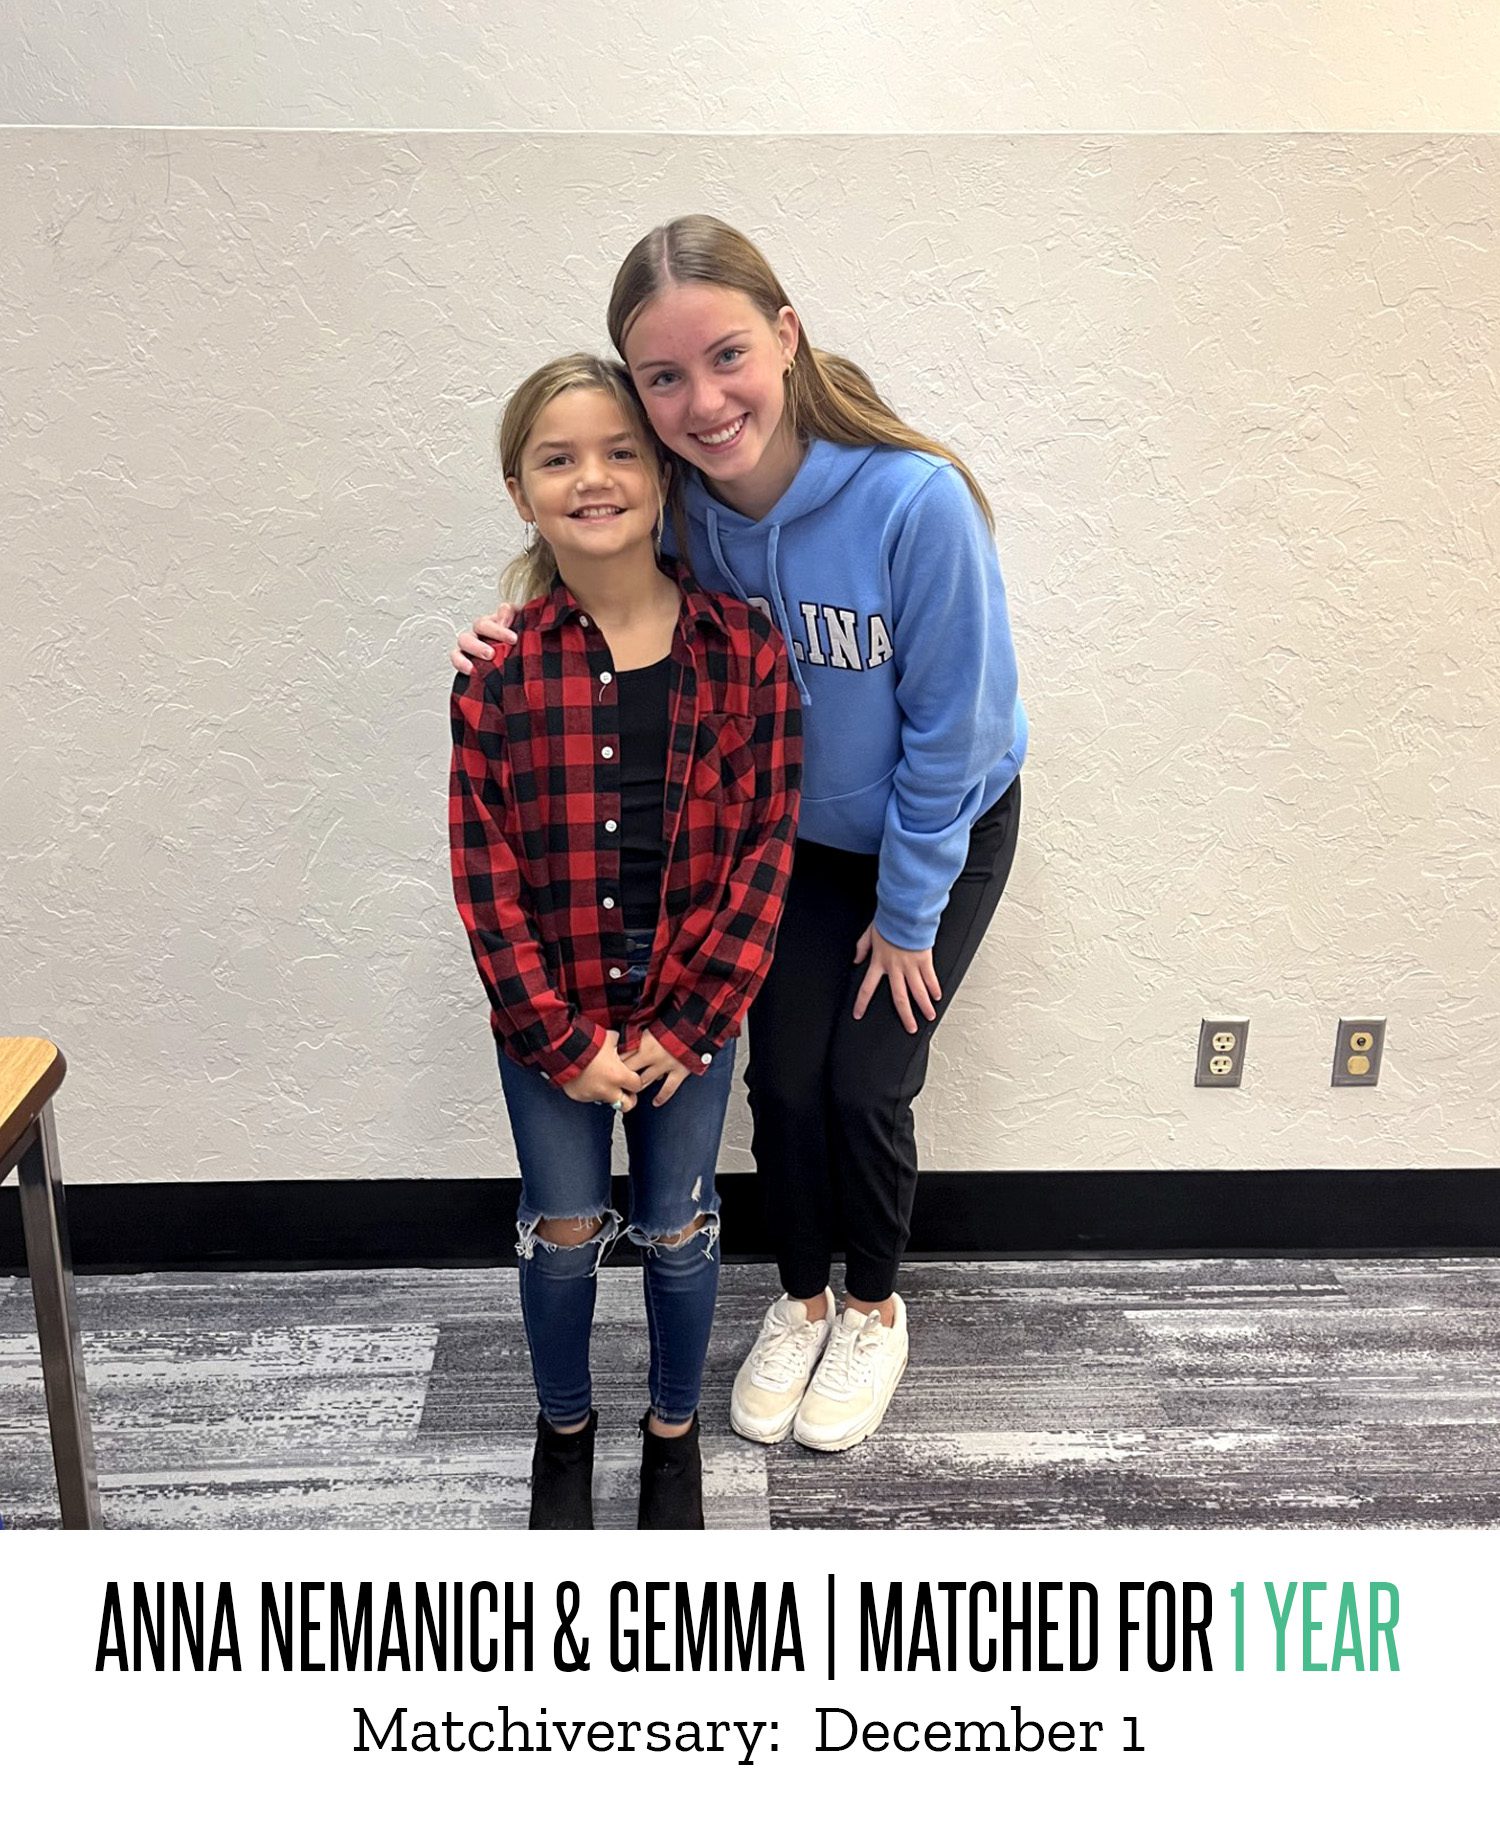 Anna Nemanich and Gemma pose for a picture after being matched for one year